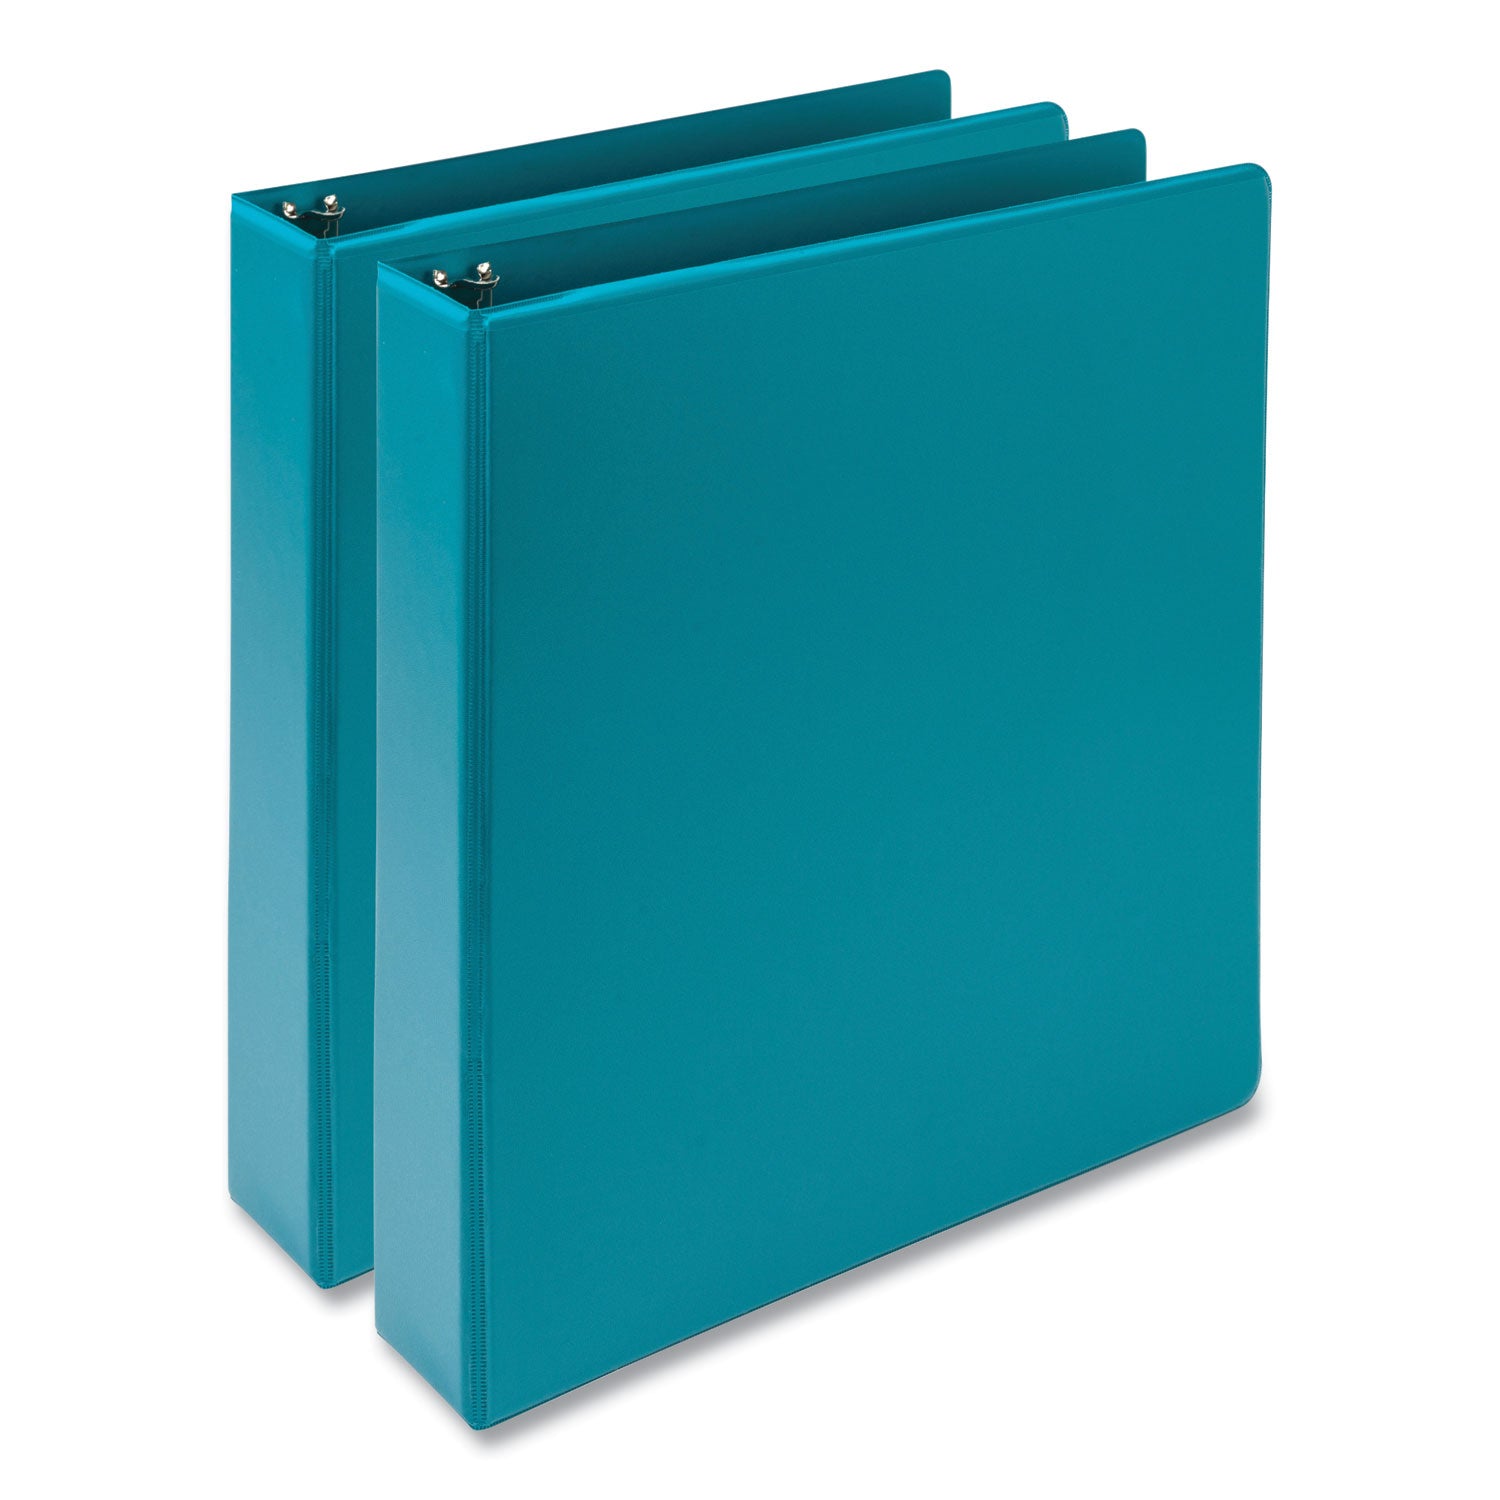 earths-choice-plant-based-economy-round-ring-view-binders-3-rings-15-capacity-11-x-85-teal-2-pack_sammp286577 - 1